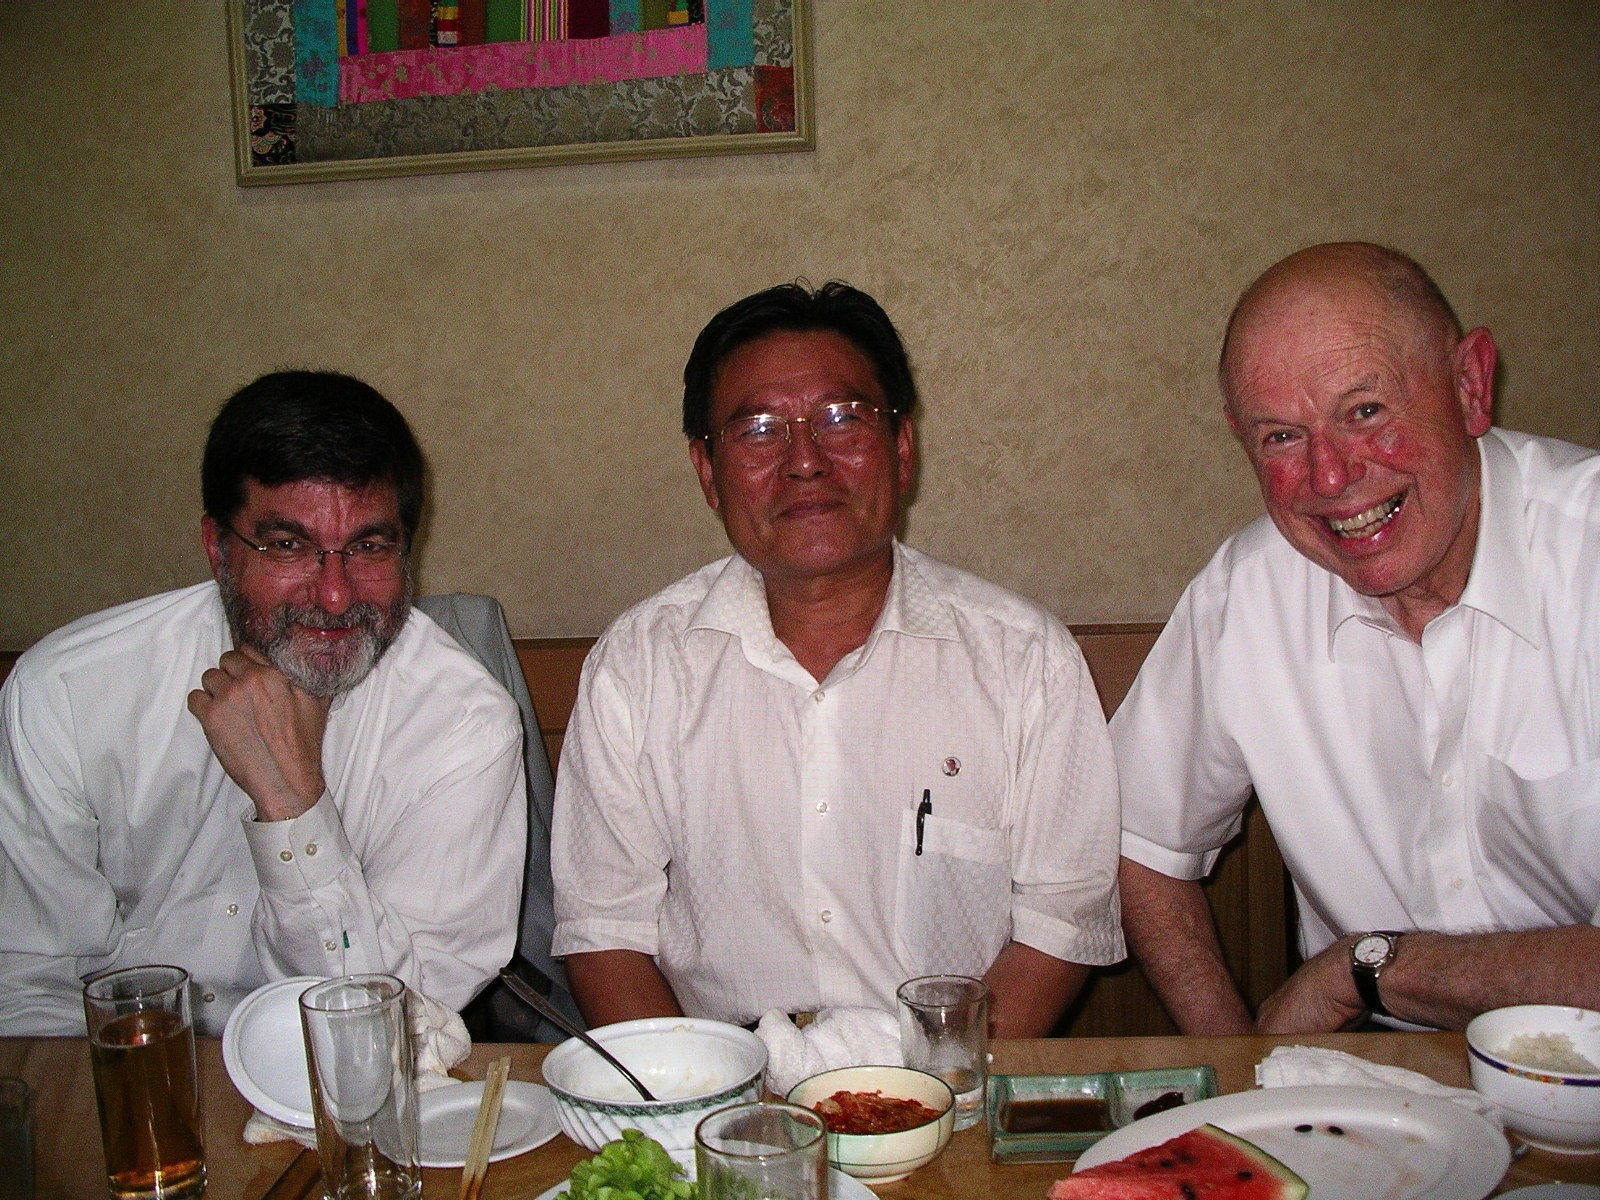 Three men in light summer shirts smiling while sitting at a laid dinner table